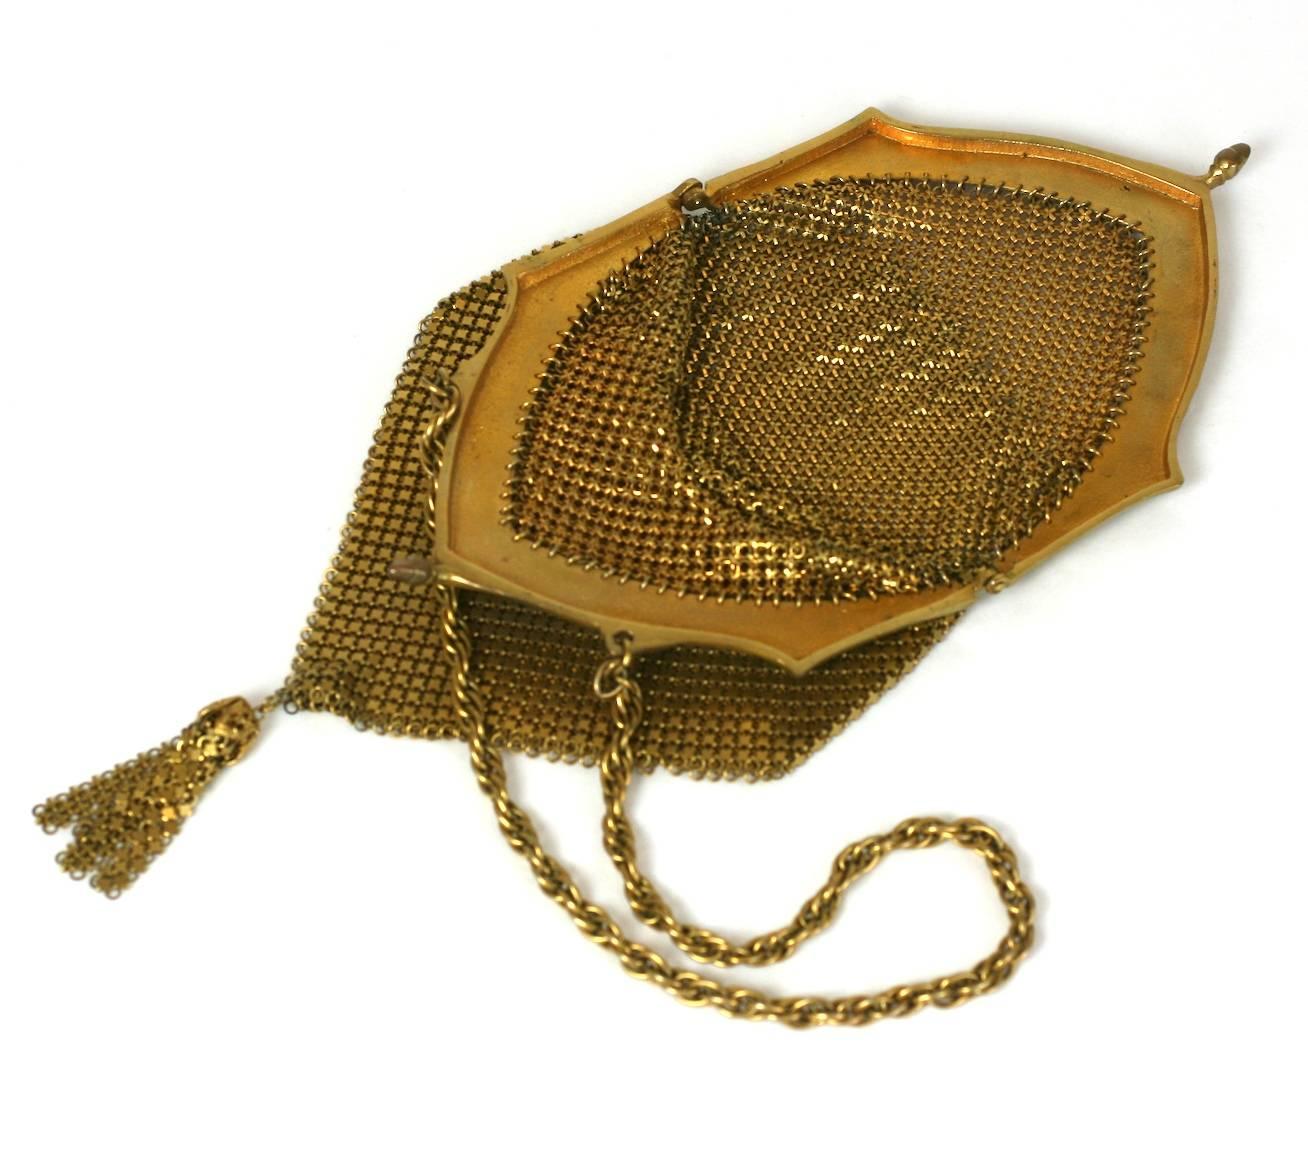 Lovely Art Deco Brass Mesh Dance Purse with mesh tassel. Ornate foliate filigree decoration runs up both sides of the frame. Acorn "kiss" clasp closure. 1920's USA.
Excellent condition. 
10.5" x 4". Chain 14". 